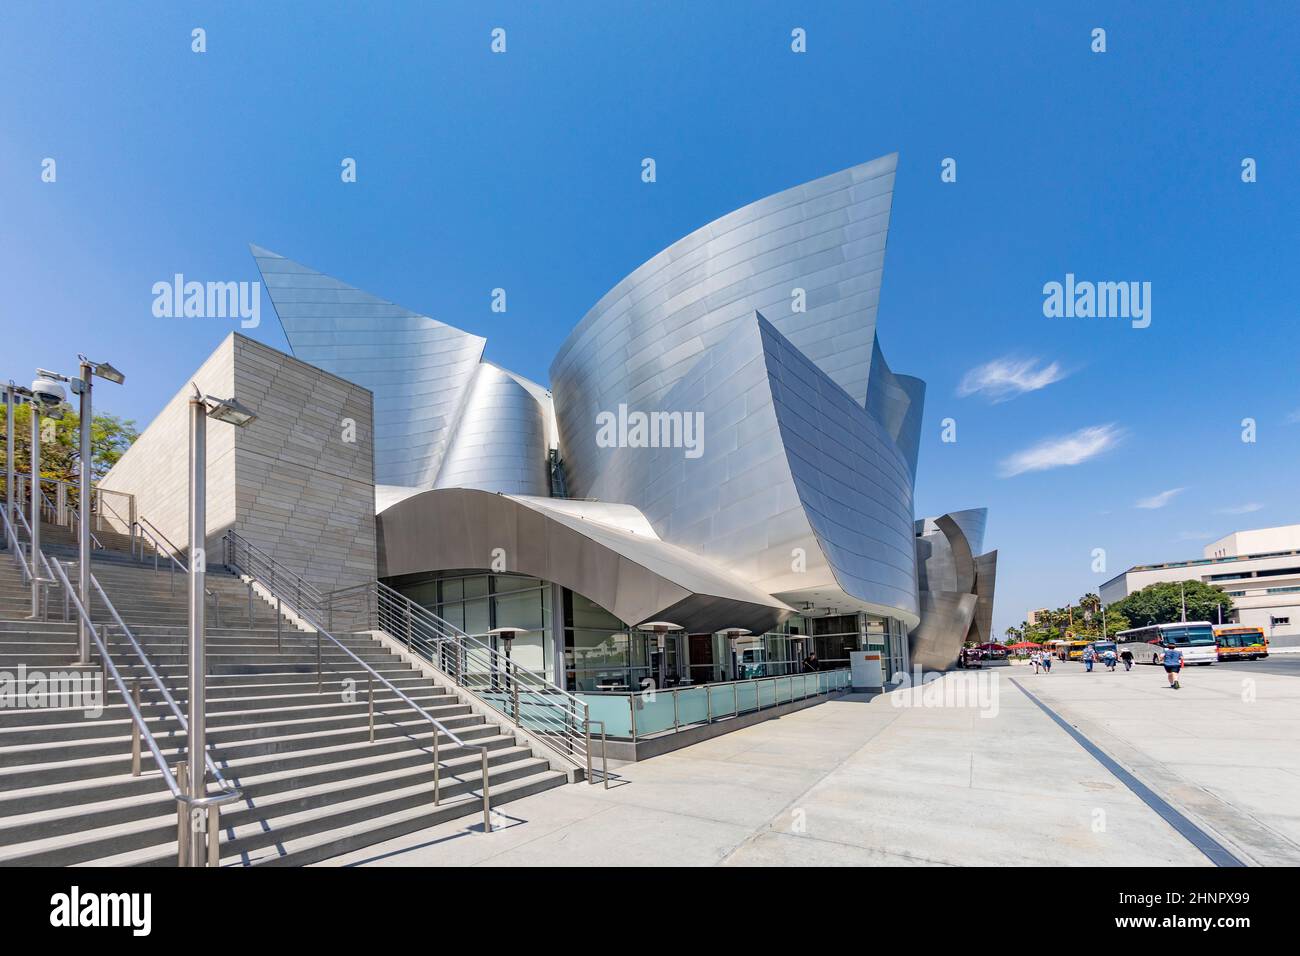 Walt Disney Concert Hall designed by architect Frank Gehry, is home of the Los Angeles Philharmonic orchestra and the Los Angeles Master Chorale Stock Photo